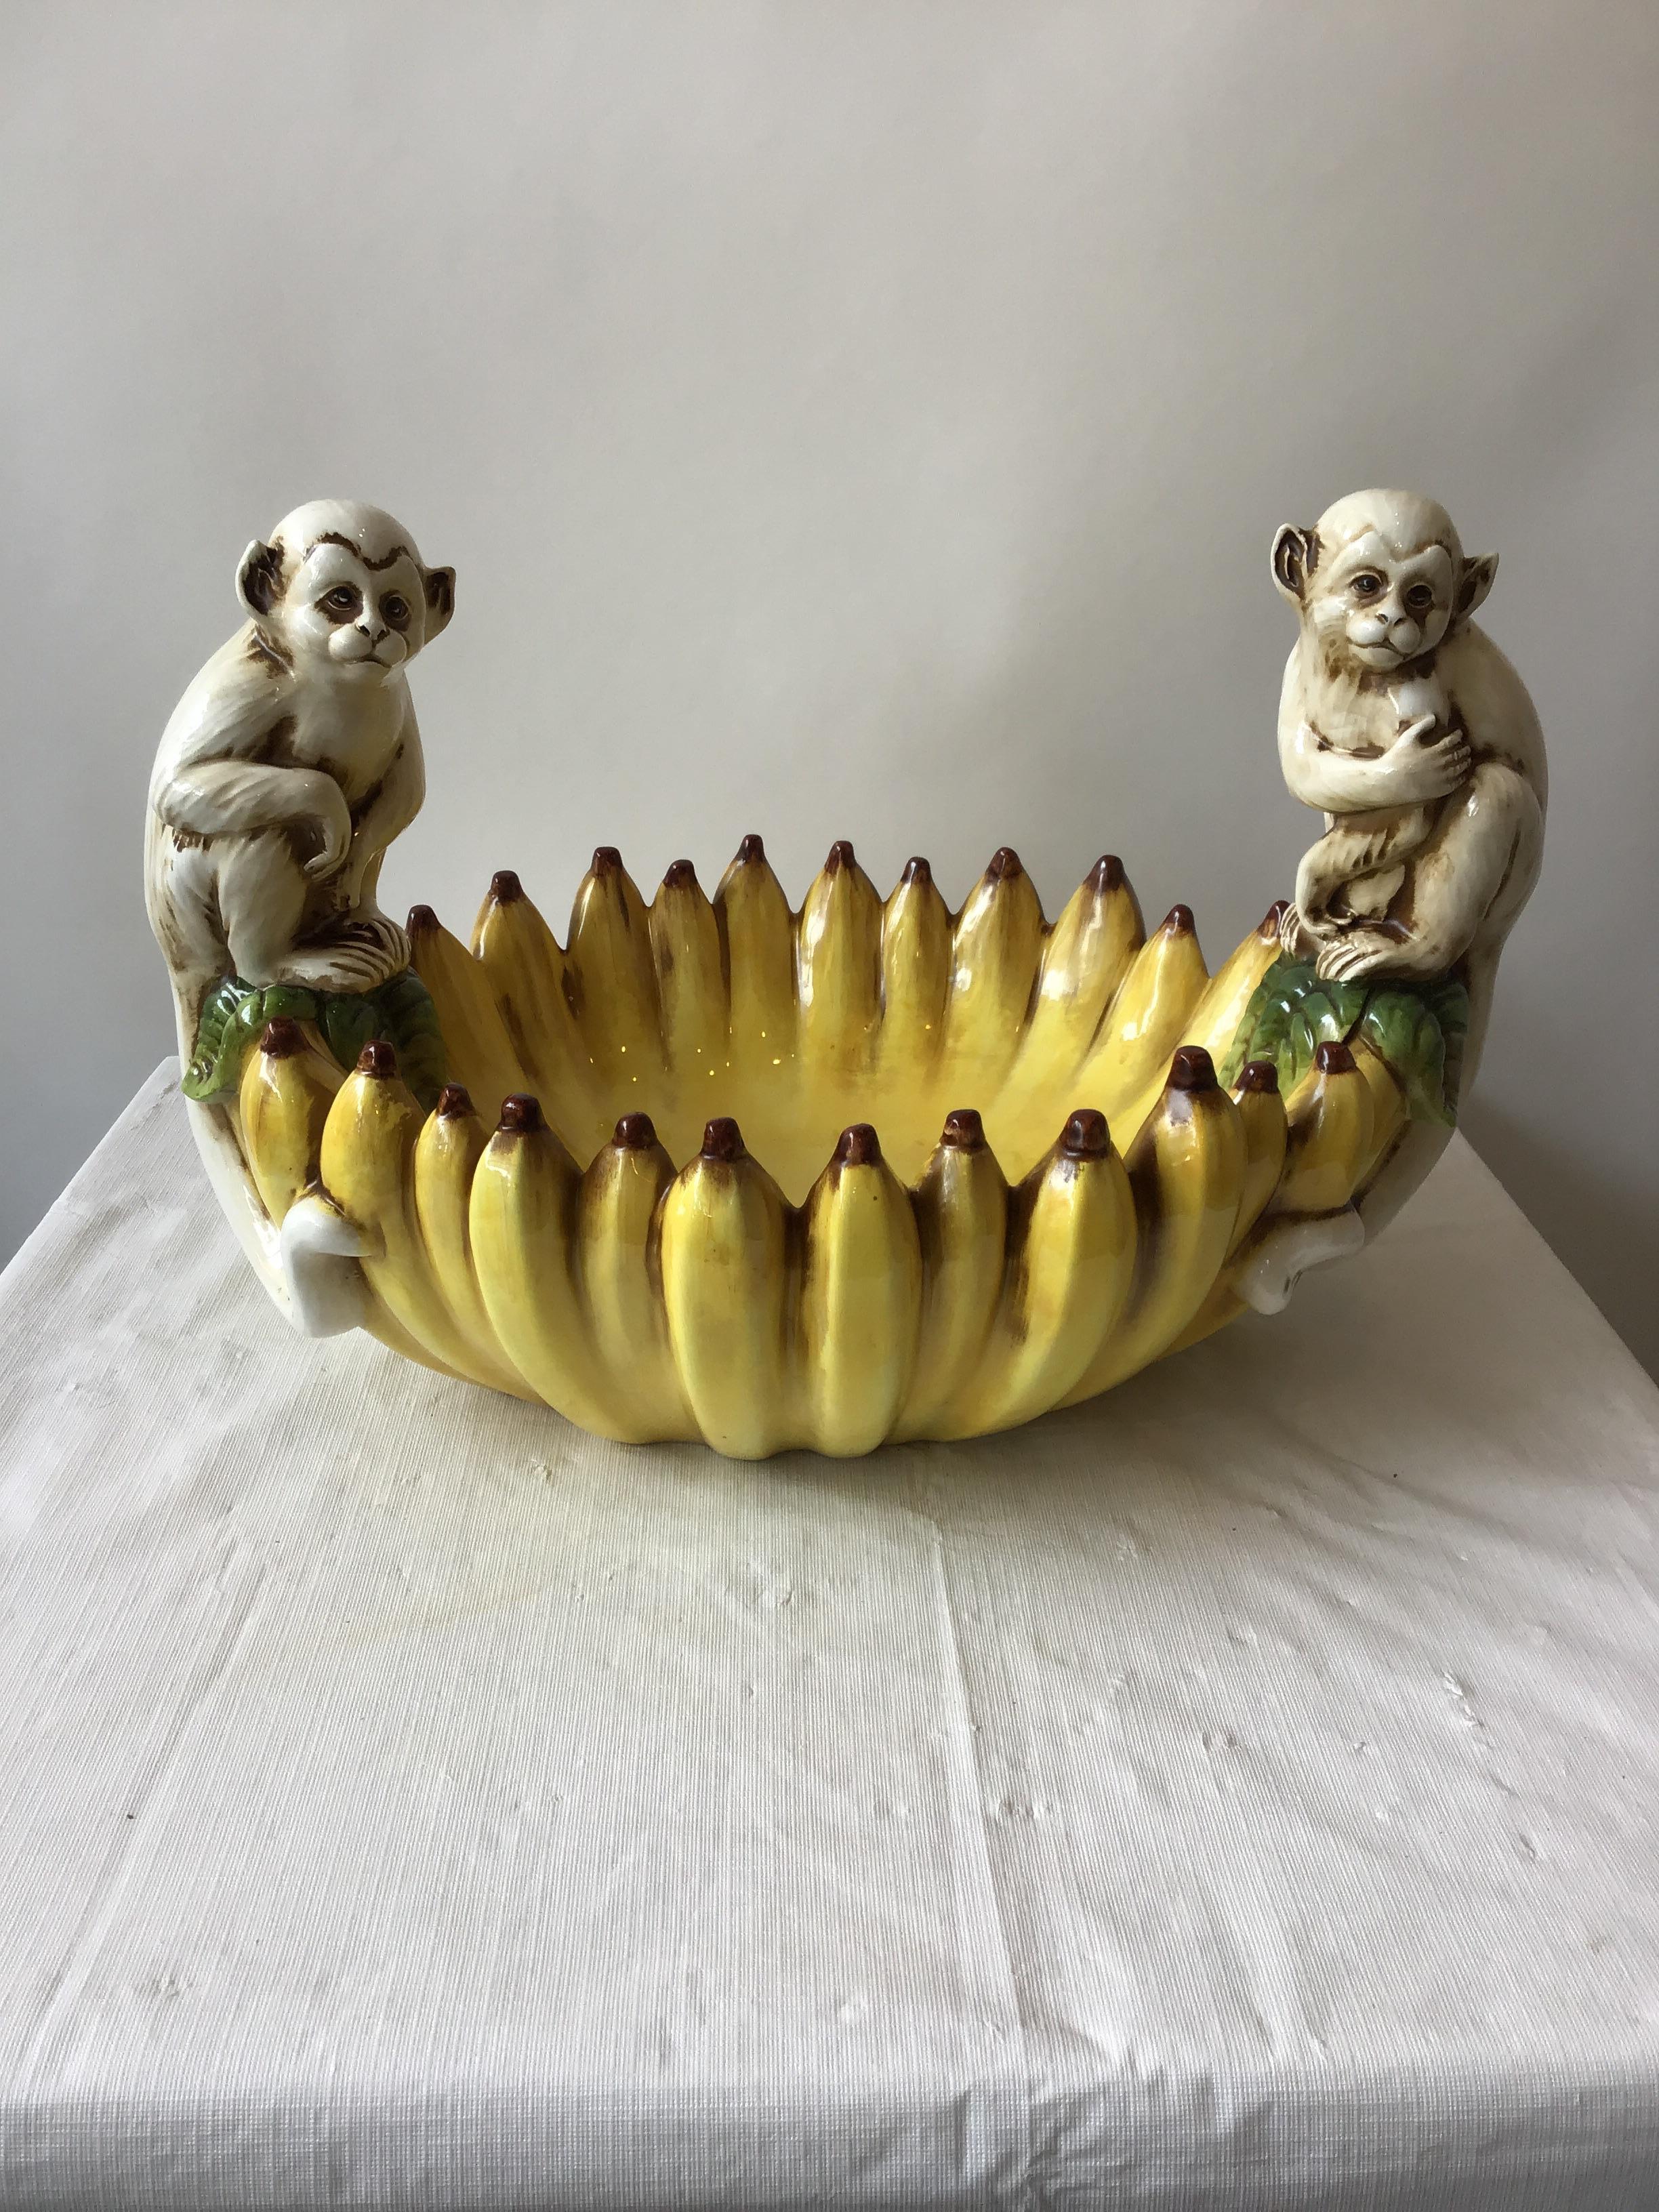 1970s hand painted Italian ceramic monkey bowl made for Gumps.